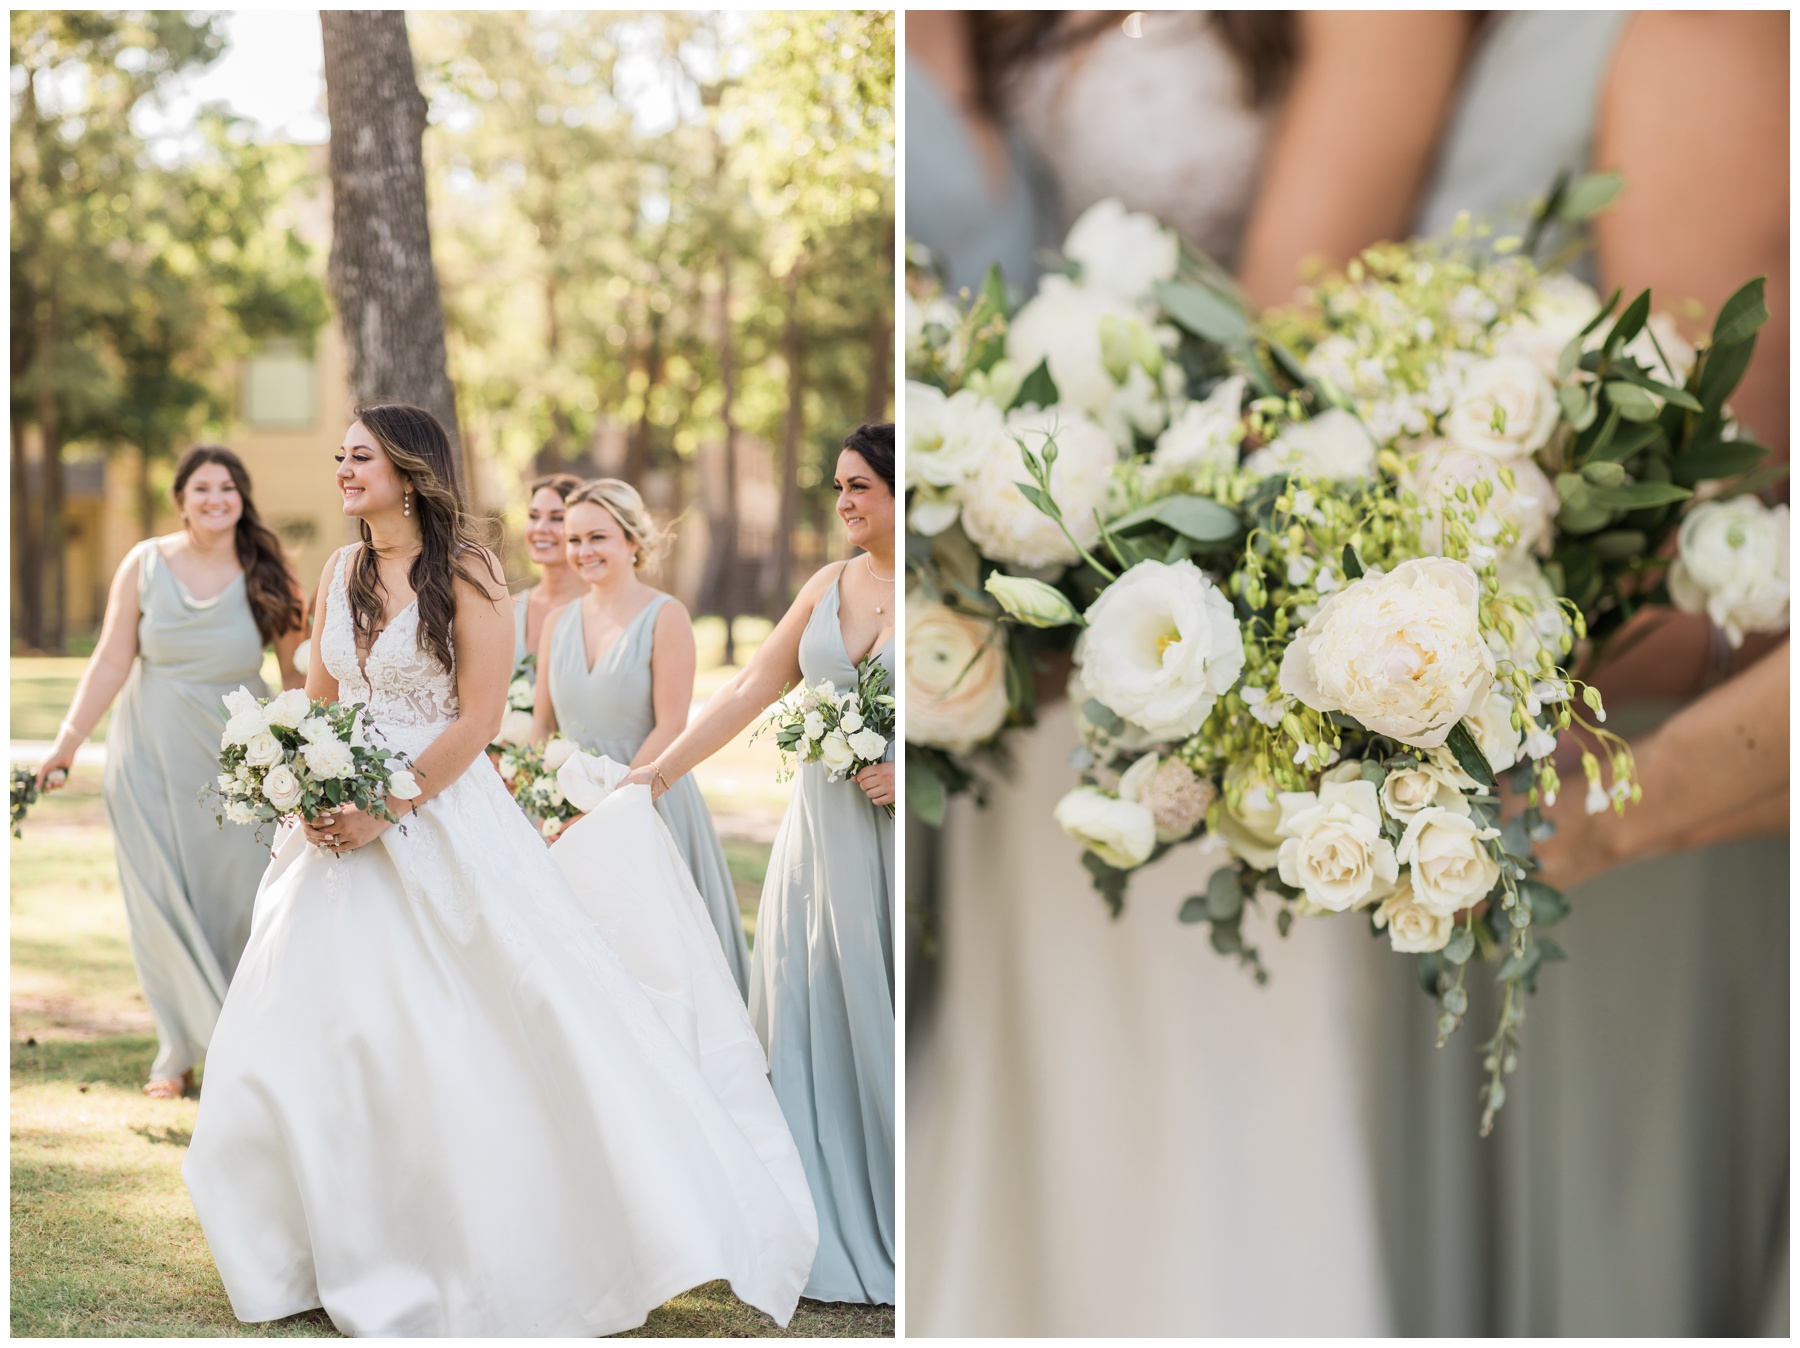 A bridal bouquet filled with white roses and blush peonies from Amanda Bee Floral Design